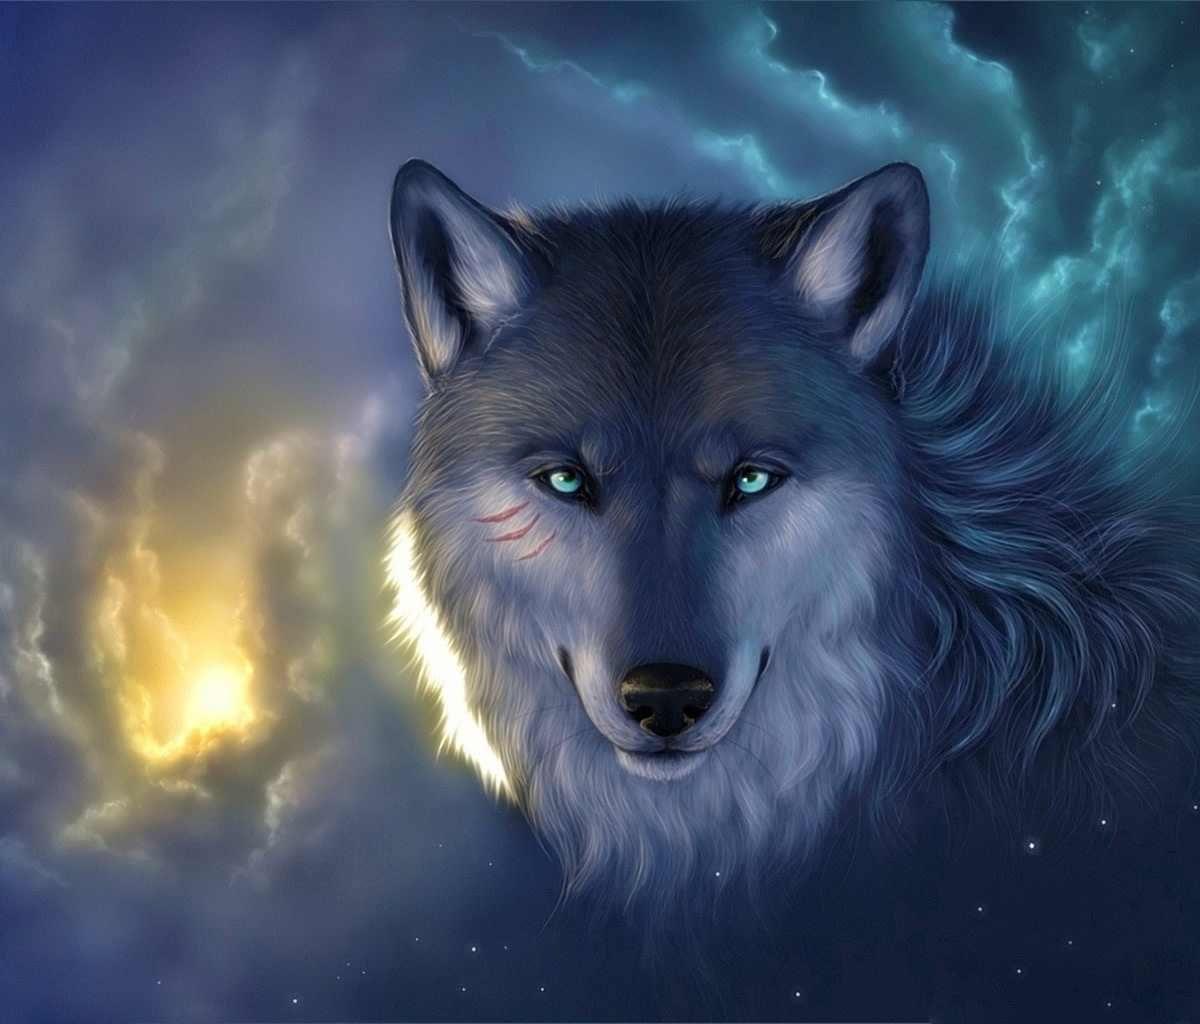 THE WOLF WALLPAPER